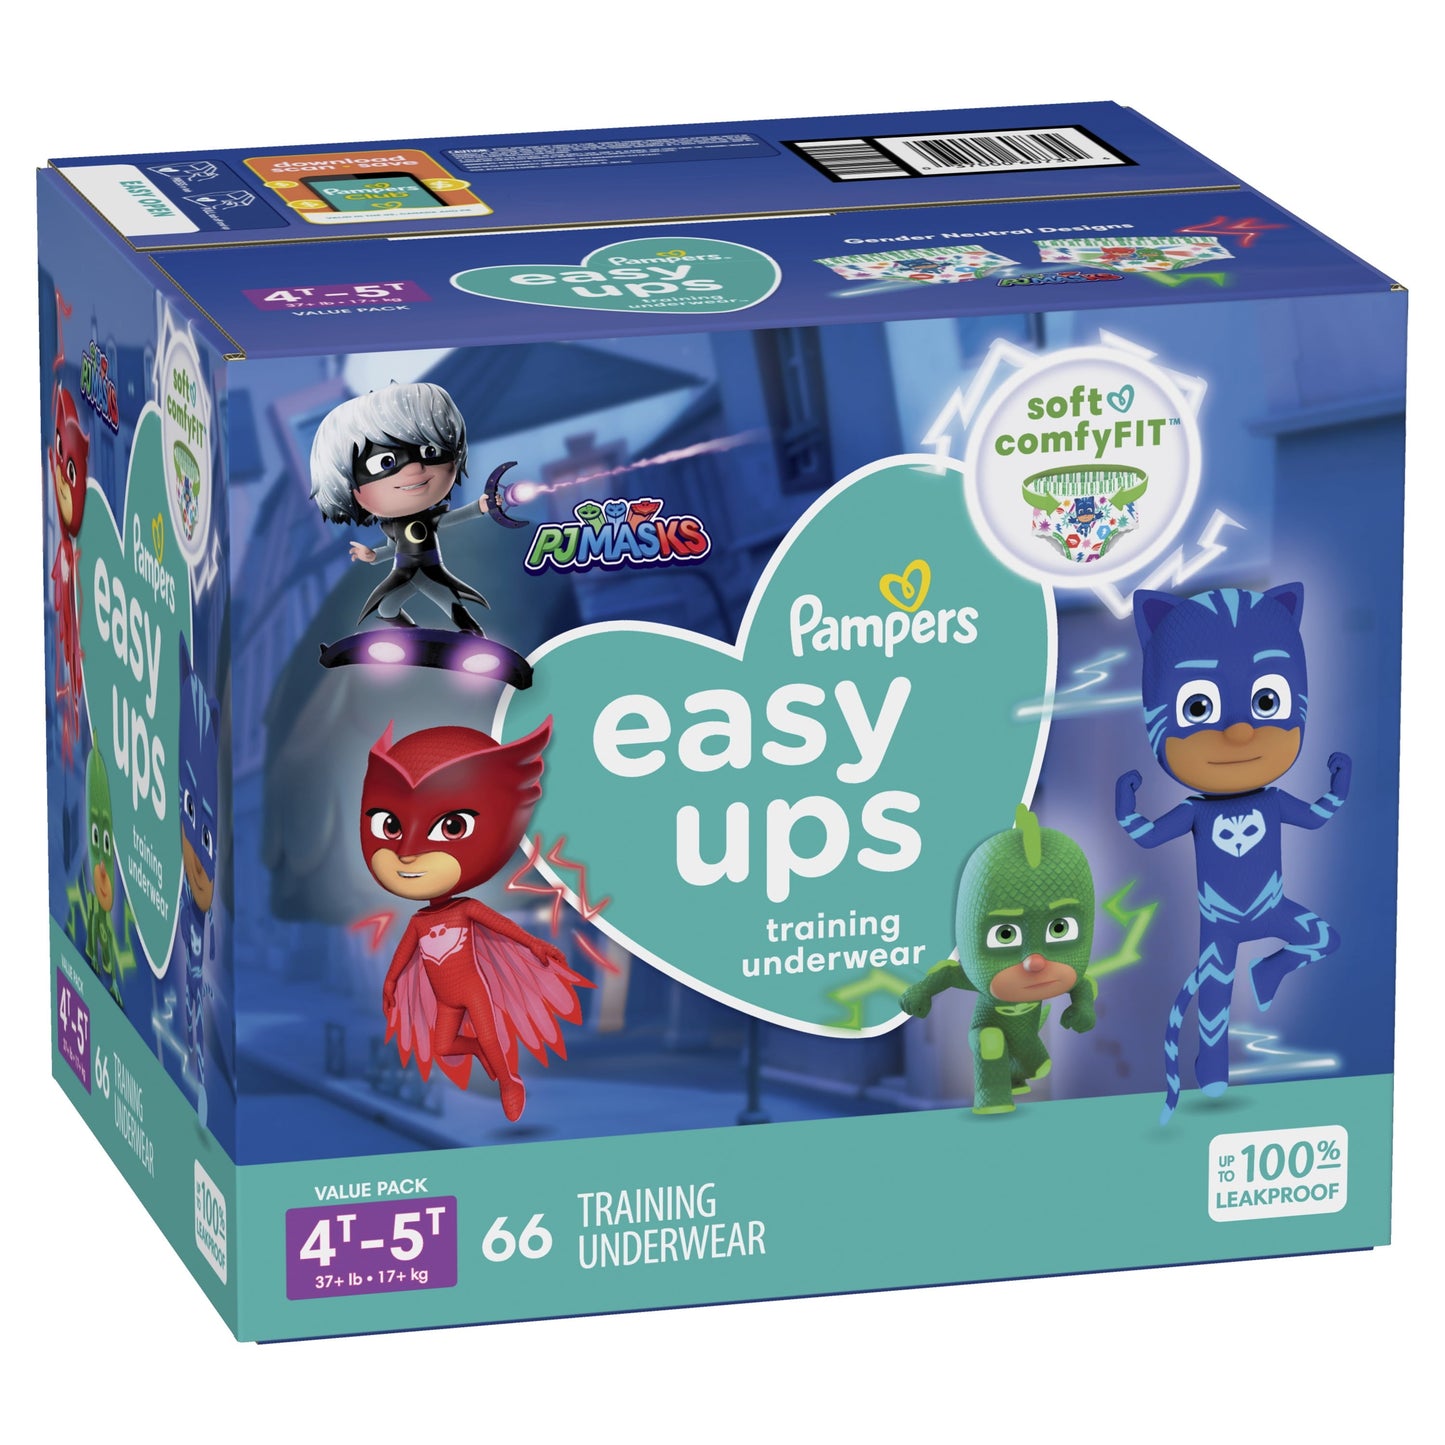 Pampers Easy Ups Bluey Training Pants Toddler Boys Size 4T/5T 66 Count